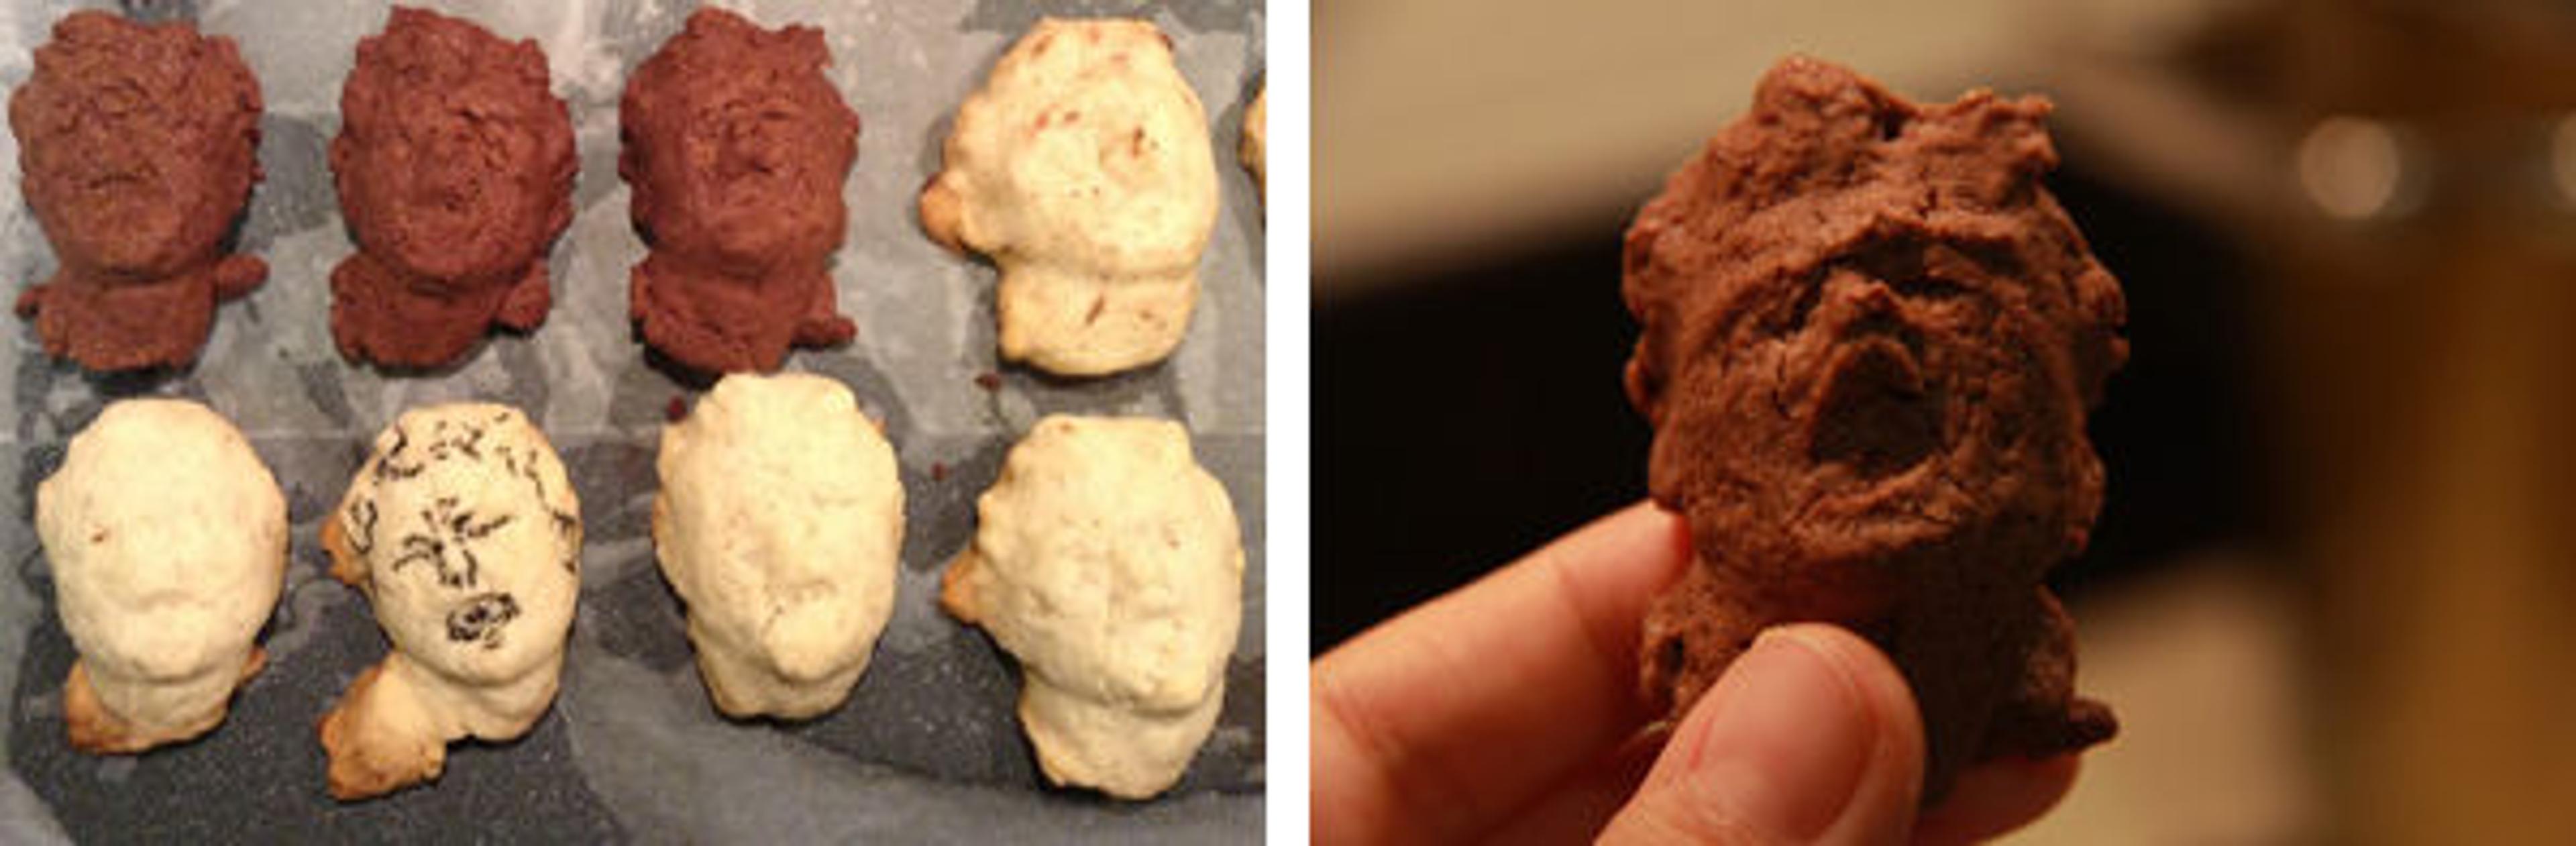 Left: A tray of Marsyus cookie castings. Right: A Marsyus cookie casting close up.